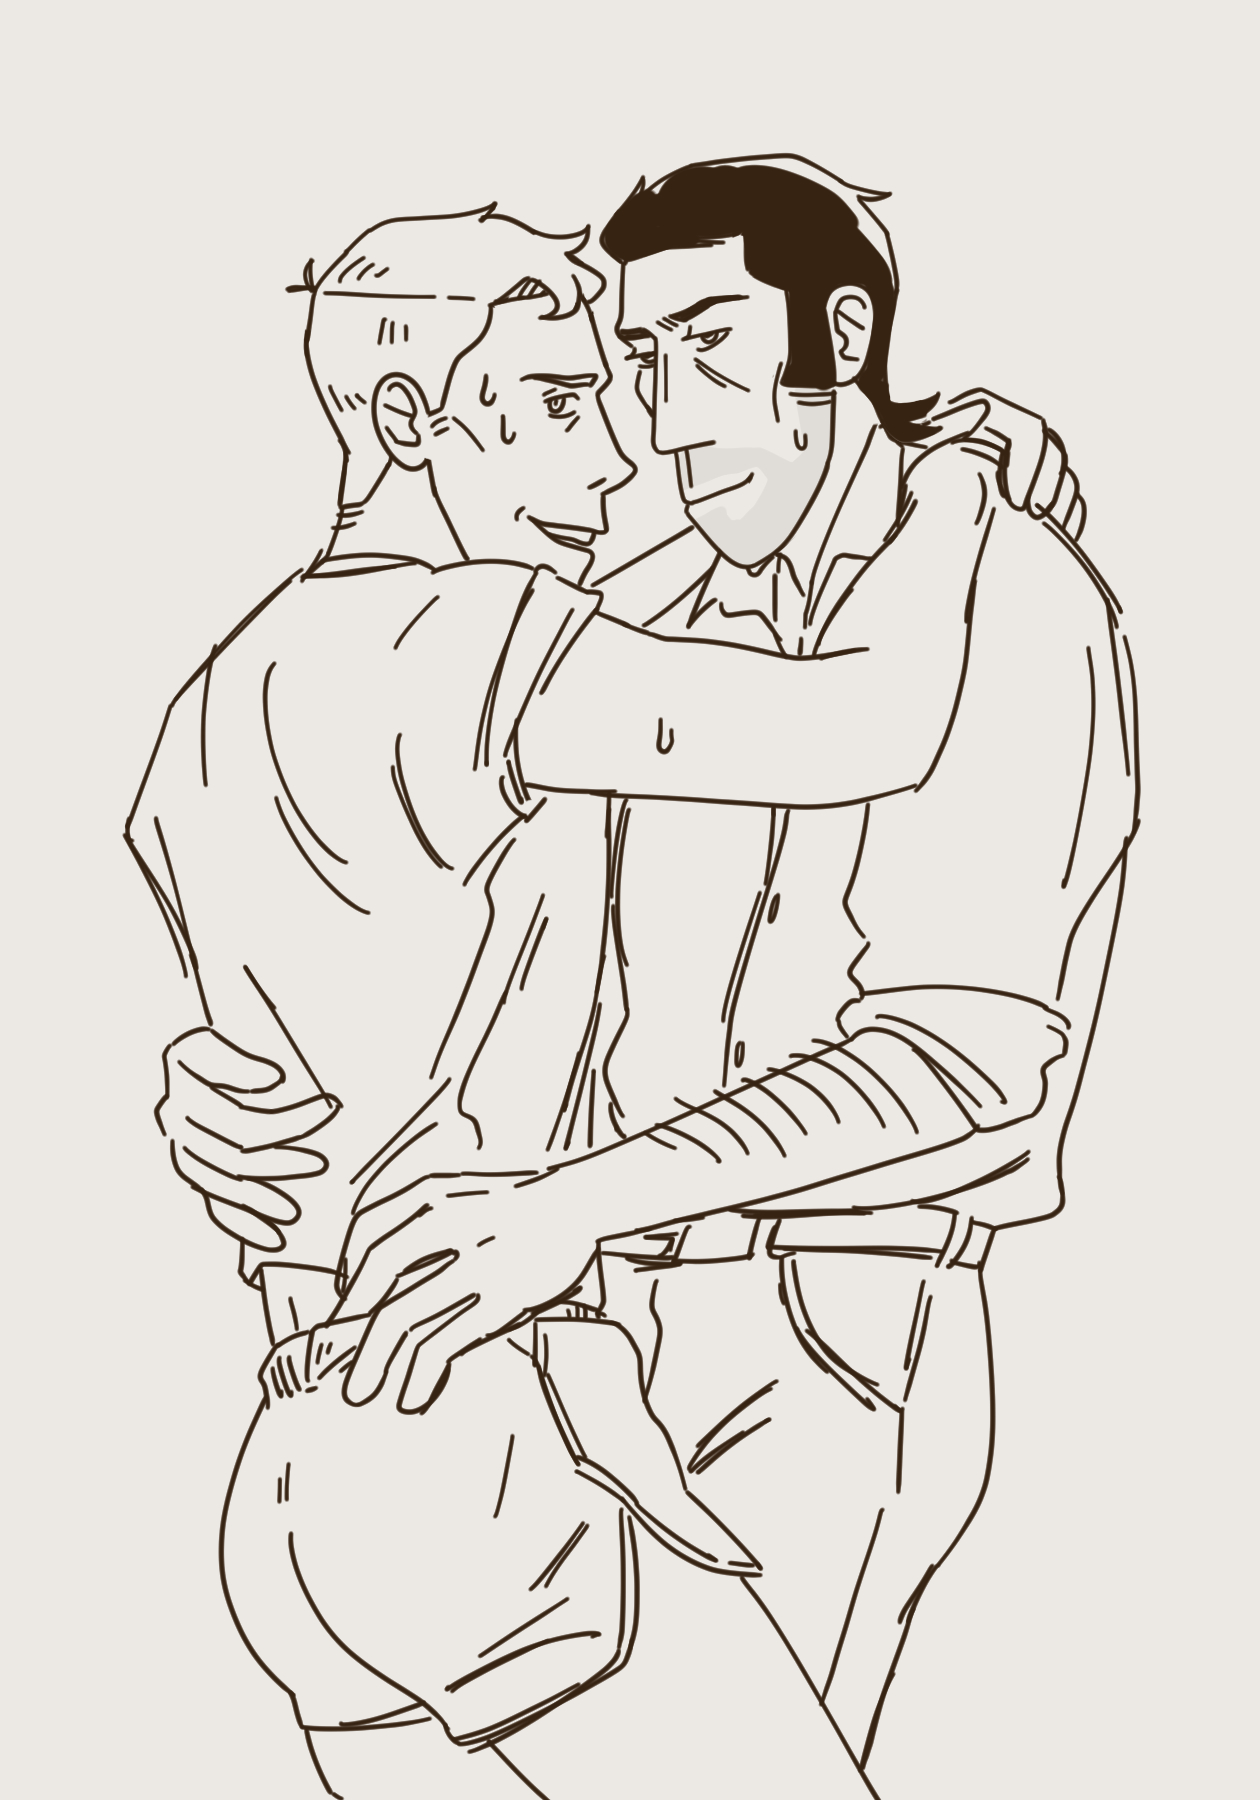 A drawing of Sniper and Scout in each other's arms, sweating.